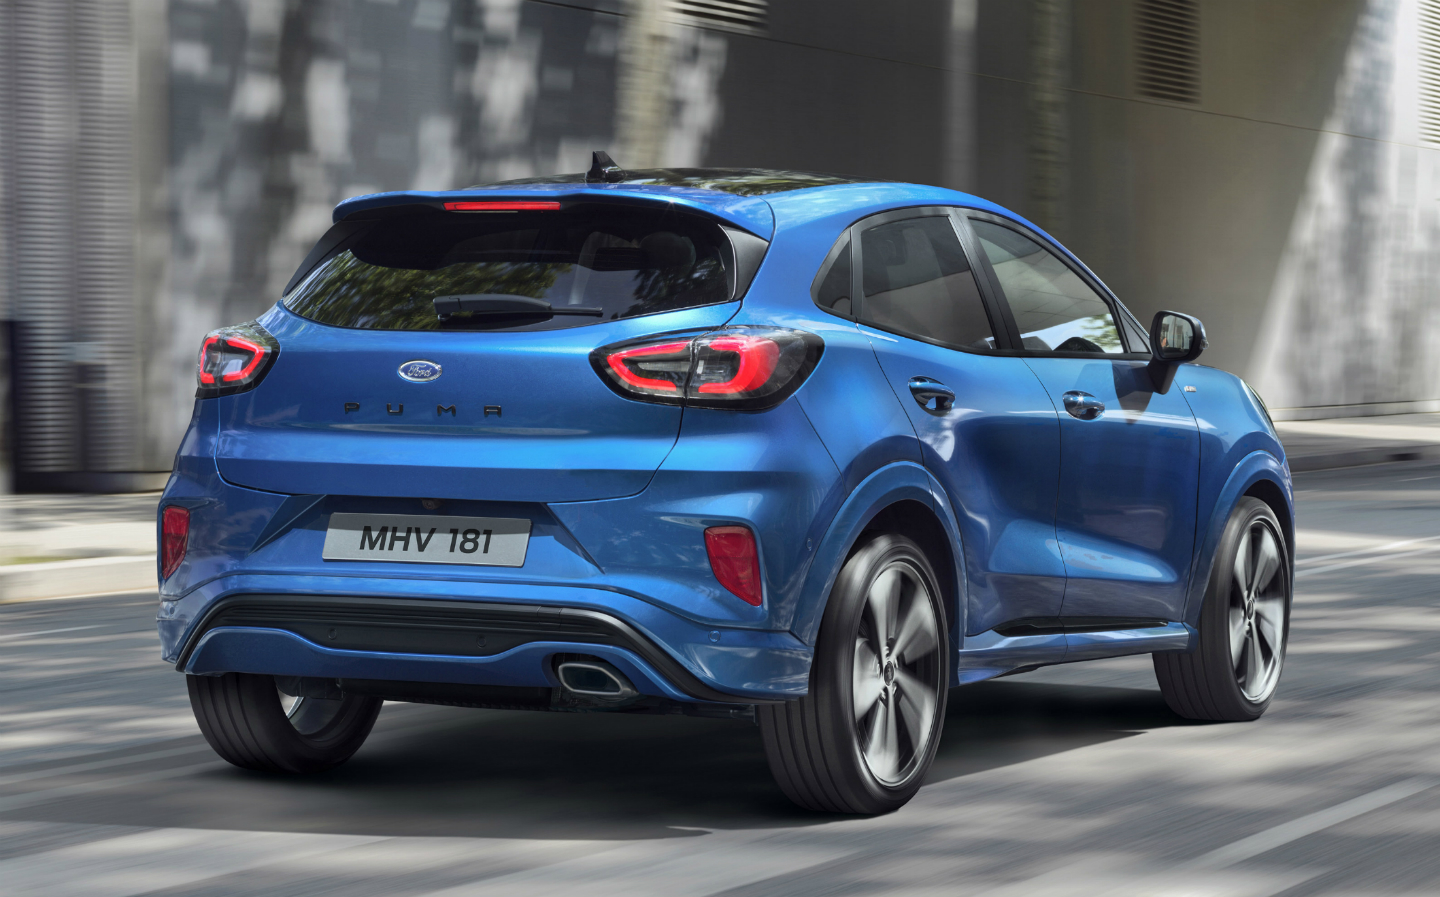 https://www.driving.co.uk/wp-content/uploads/sites/5/2019/06/2019-Ford-Puma-Reveal-04.jpg